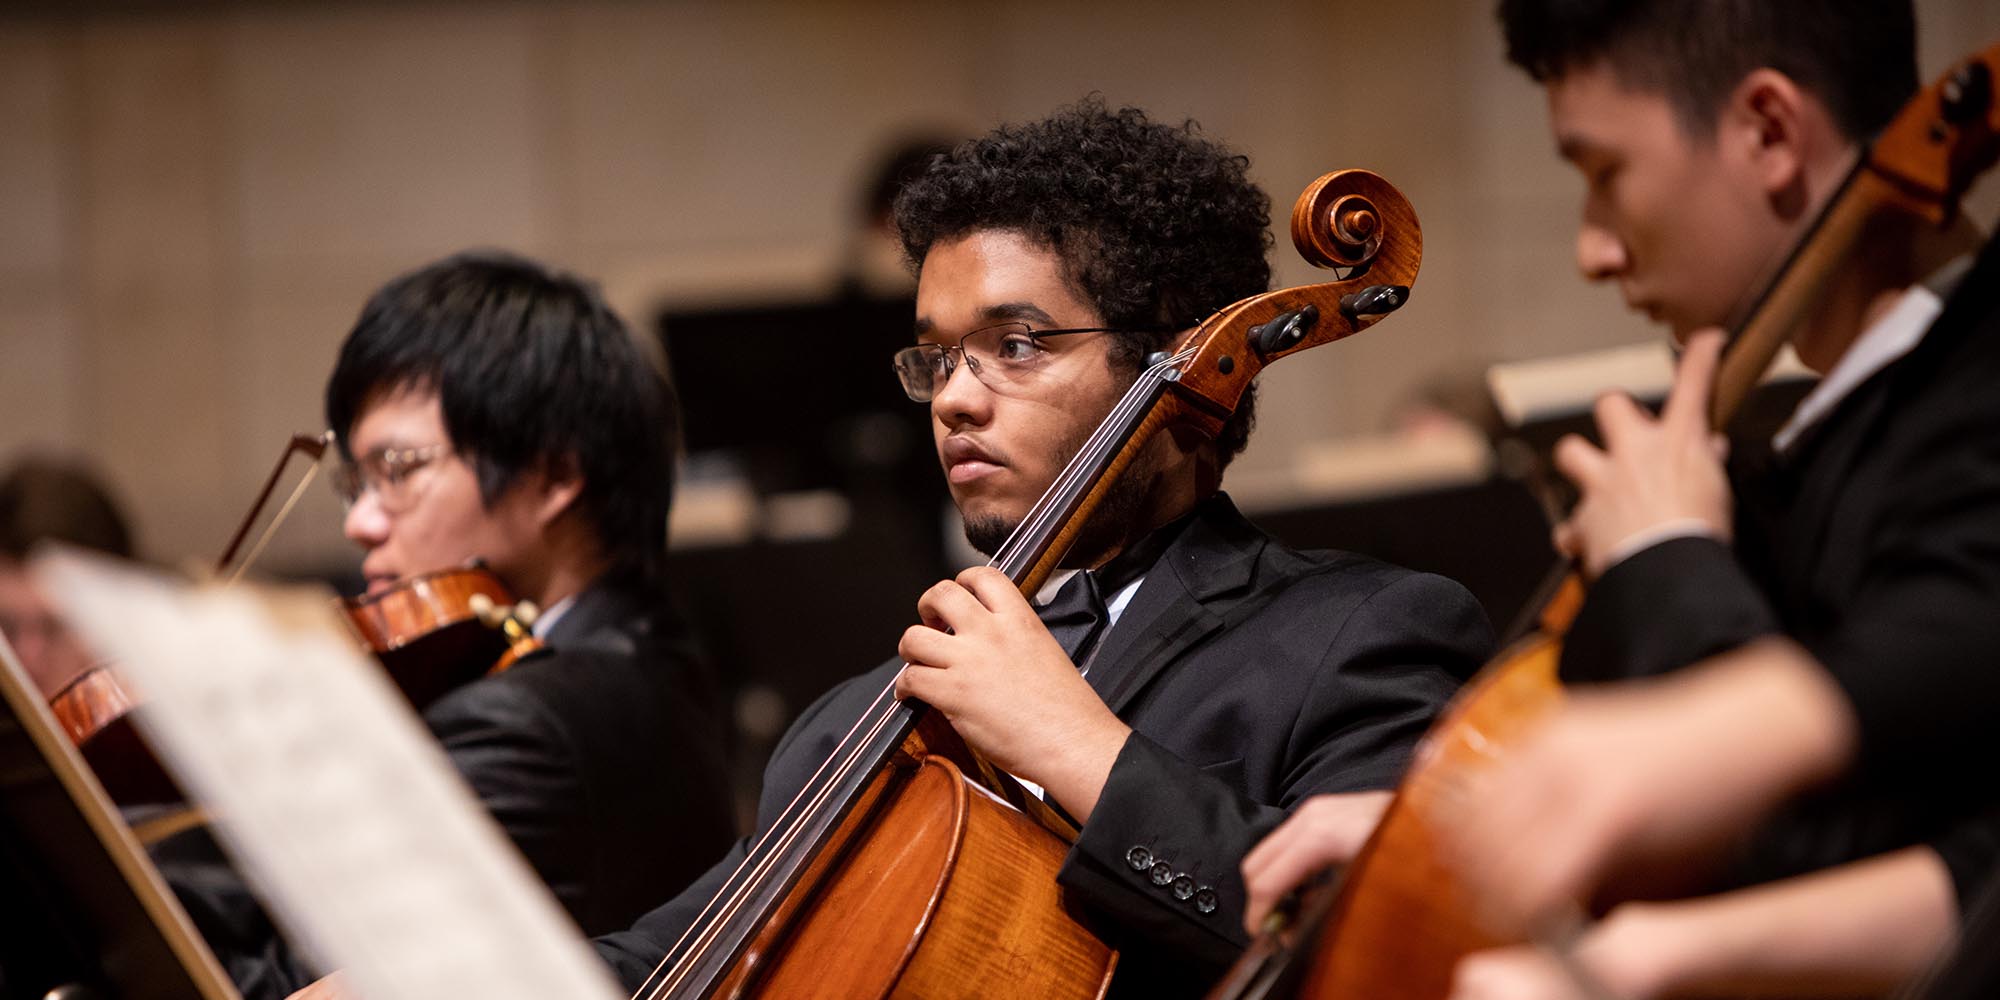 A SFCM student performing on the cello in the orchestra